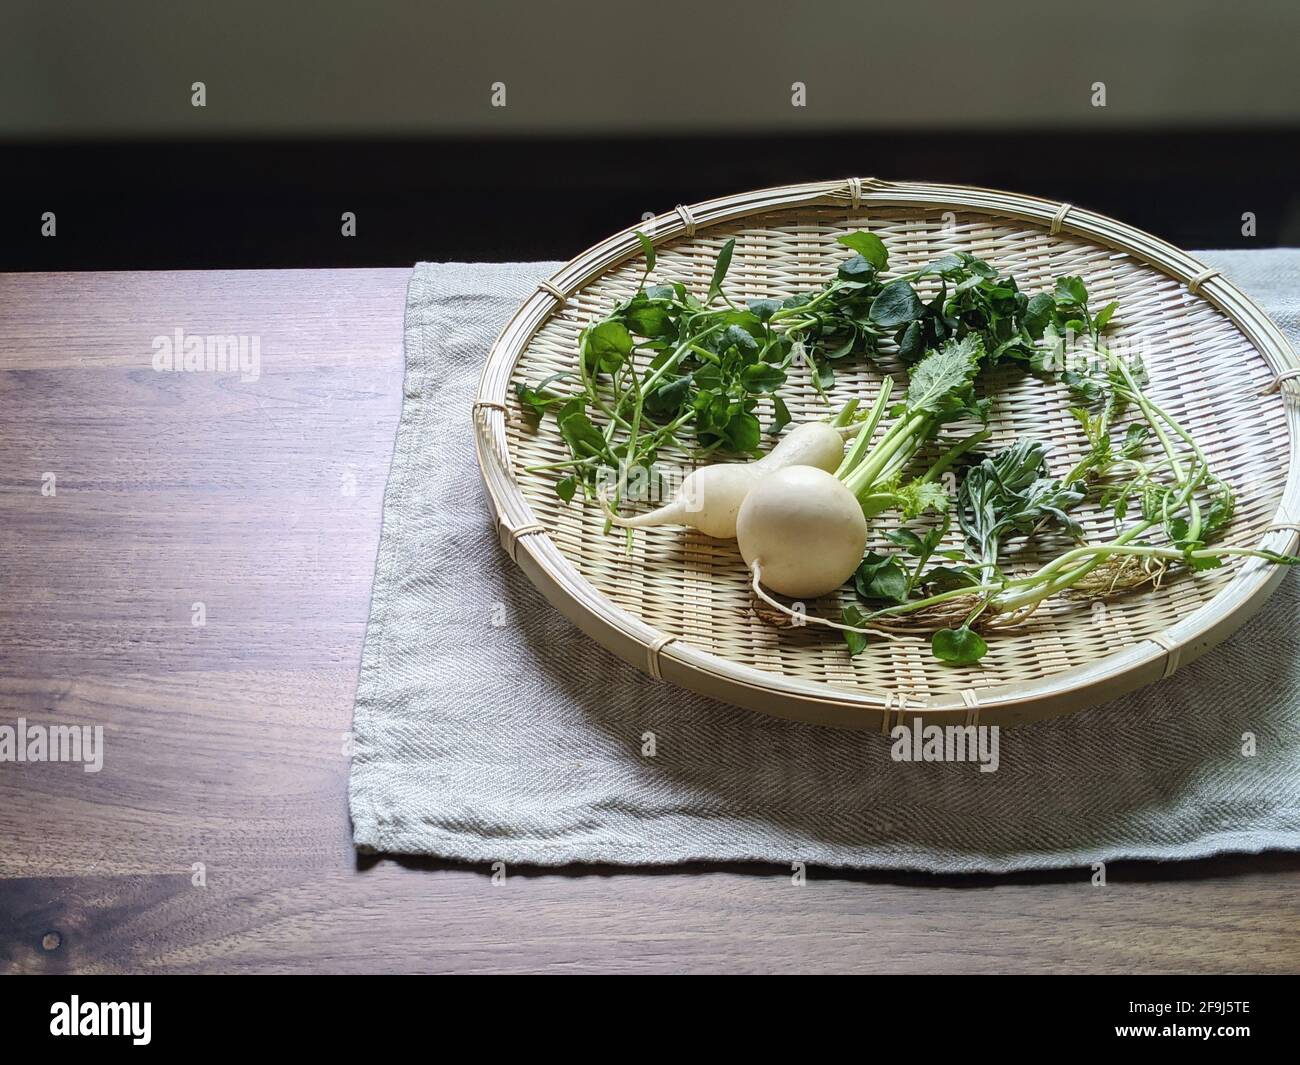 Spring Seven Herbs, Japanese Food Stock Photo